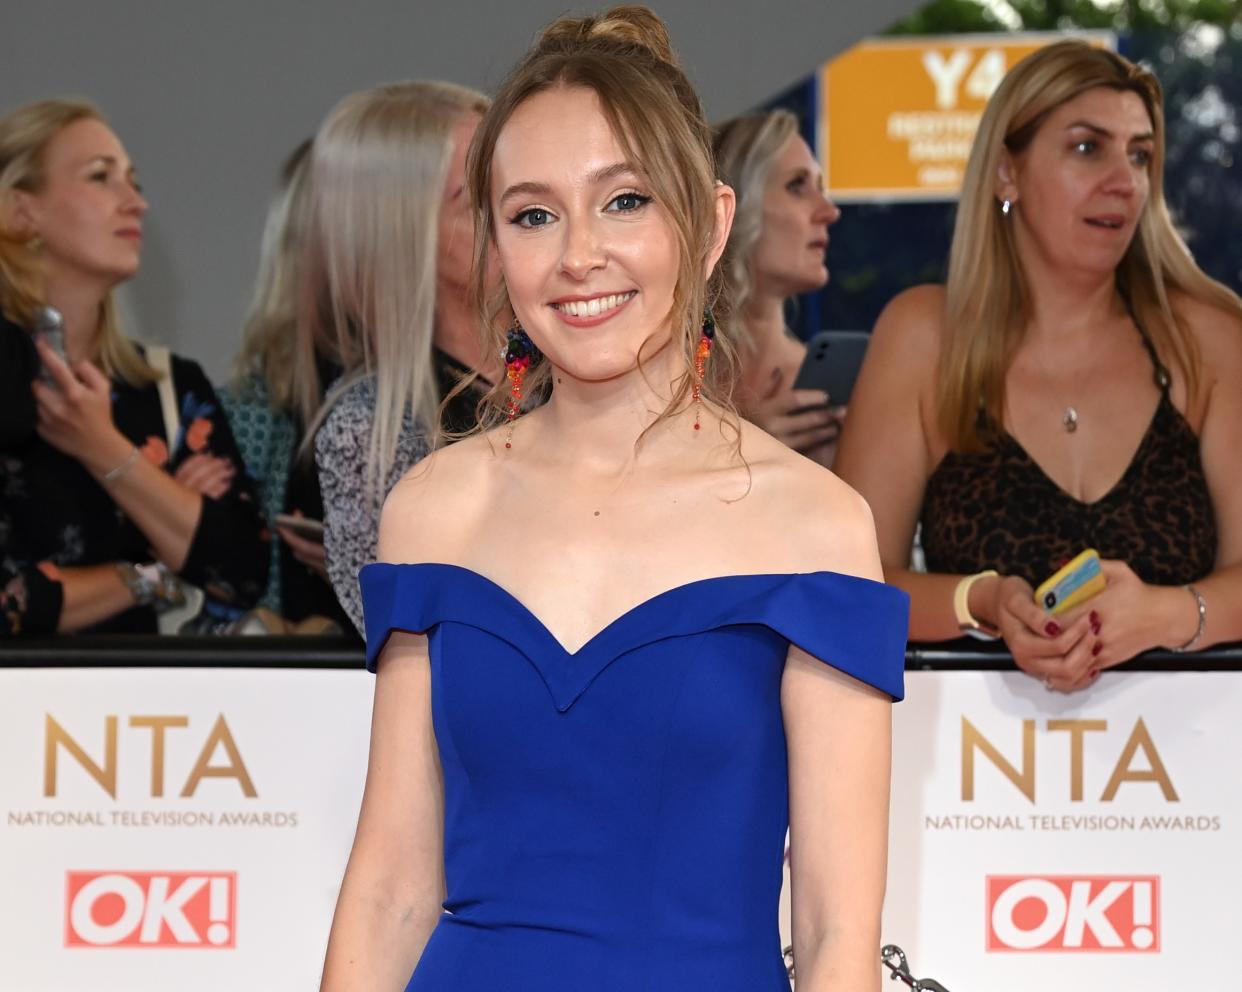 Rose Ayling-Ellis at the NTAs where she was nominated for best newcomer. (Getty Images)